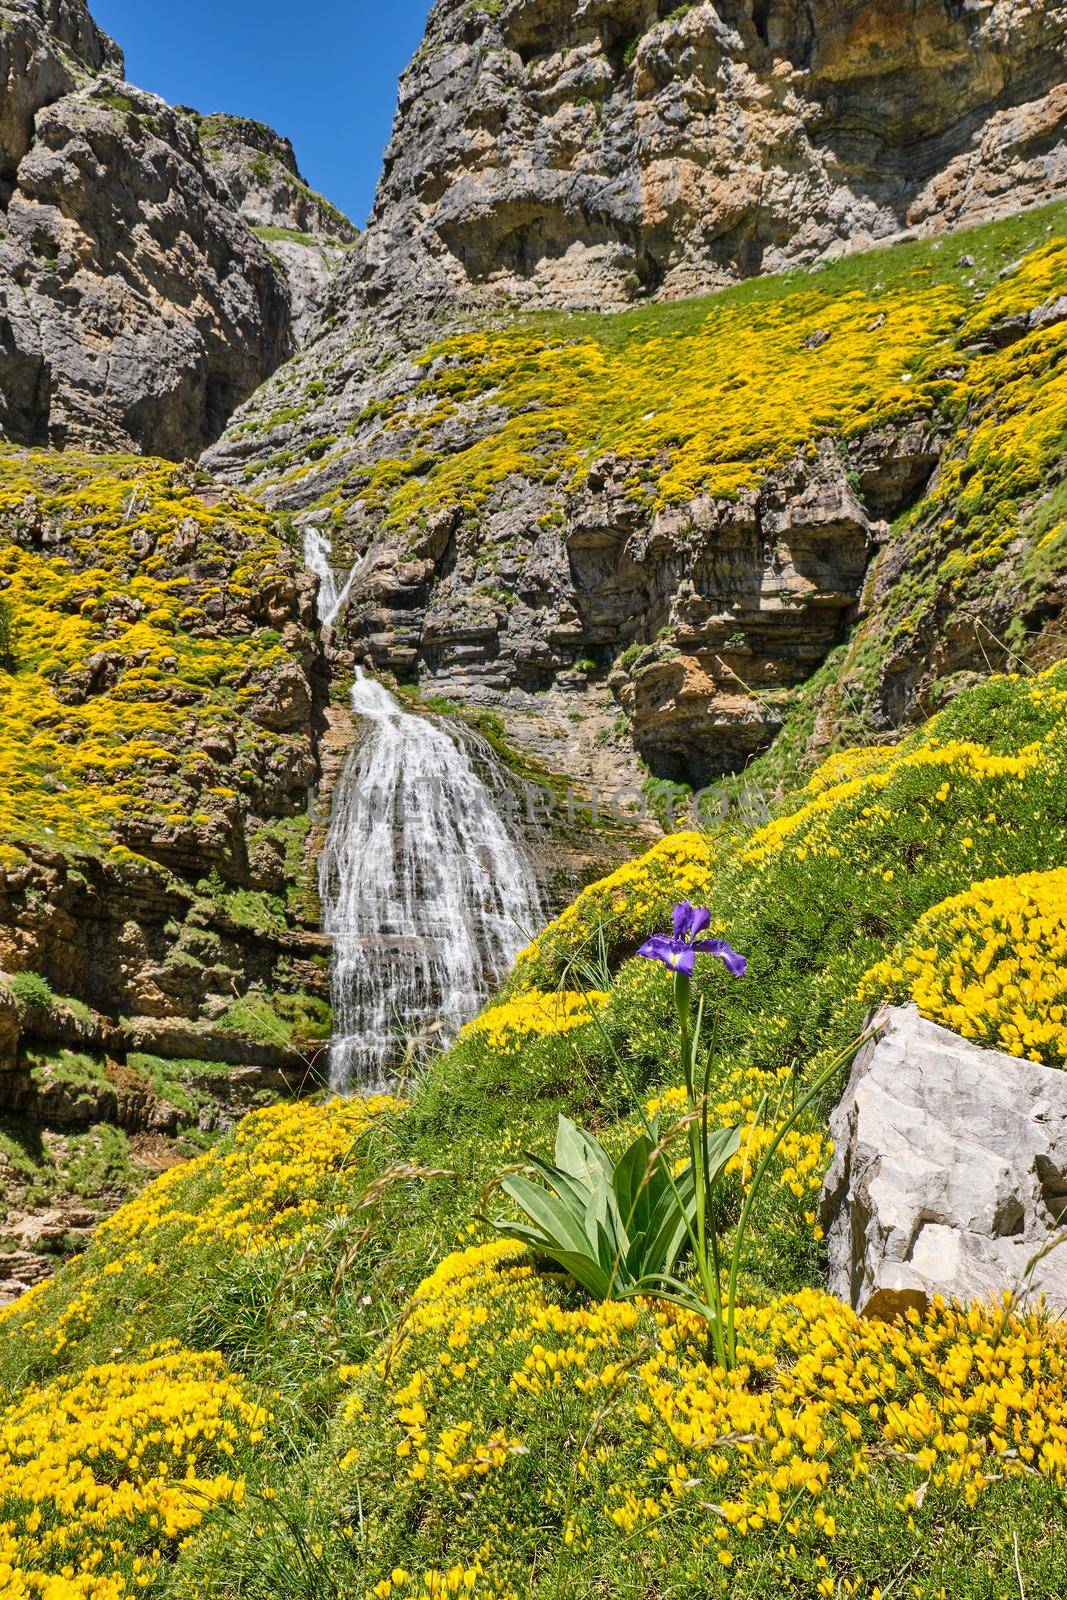 The Cola de Caballo waterfall in the Ordesa Valley with flowering yellow gorse